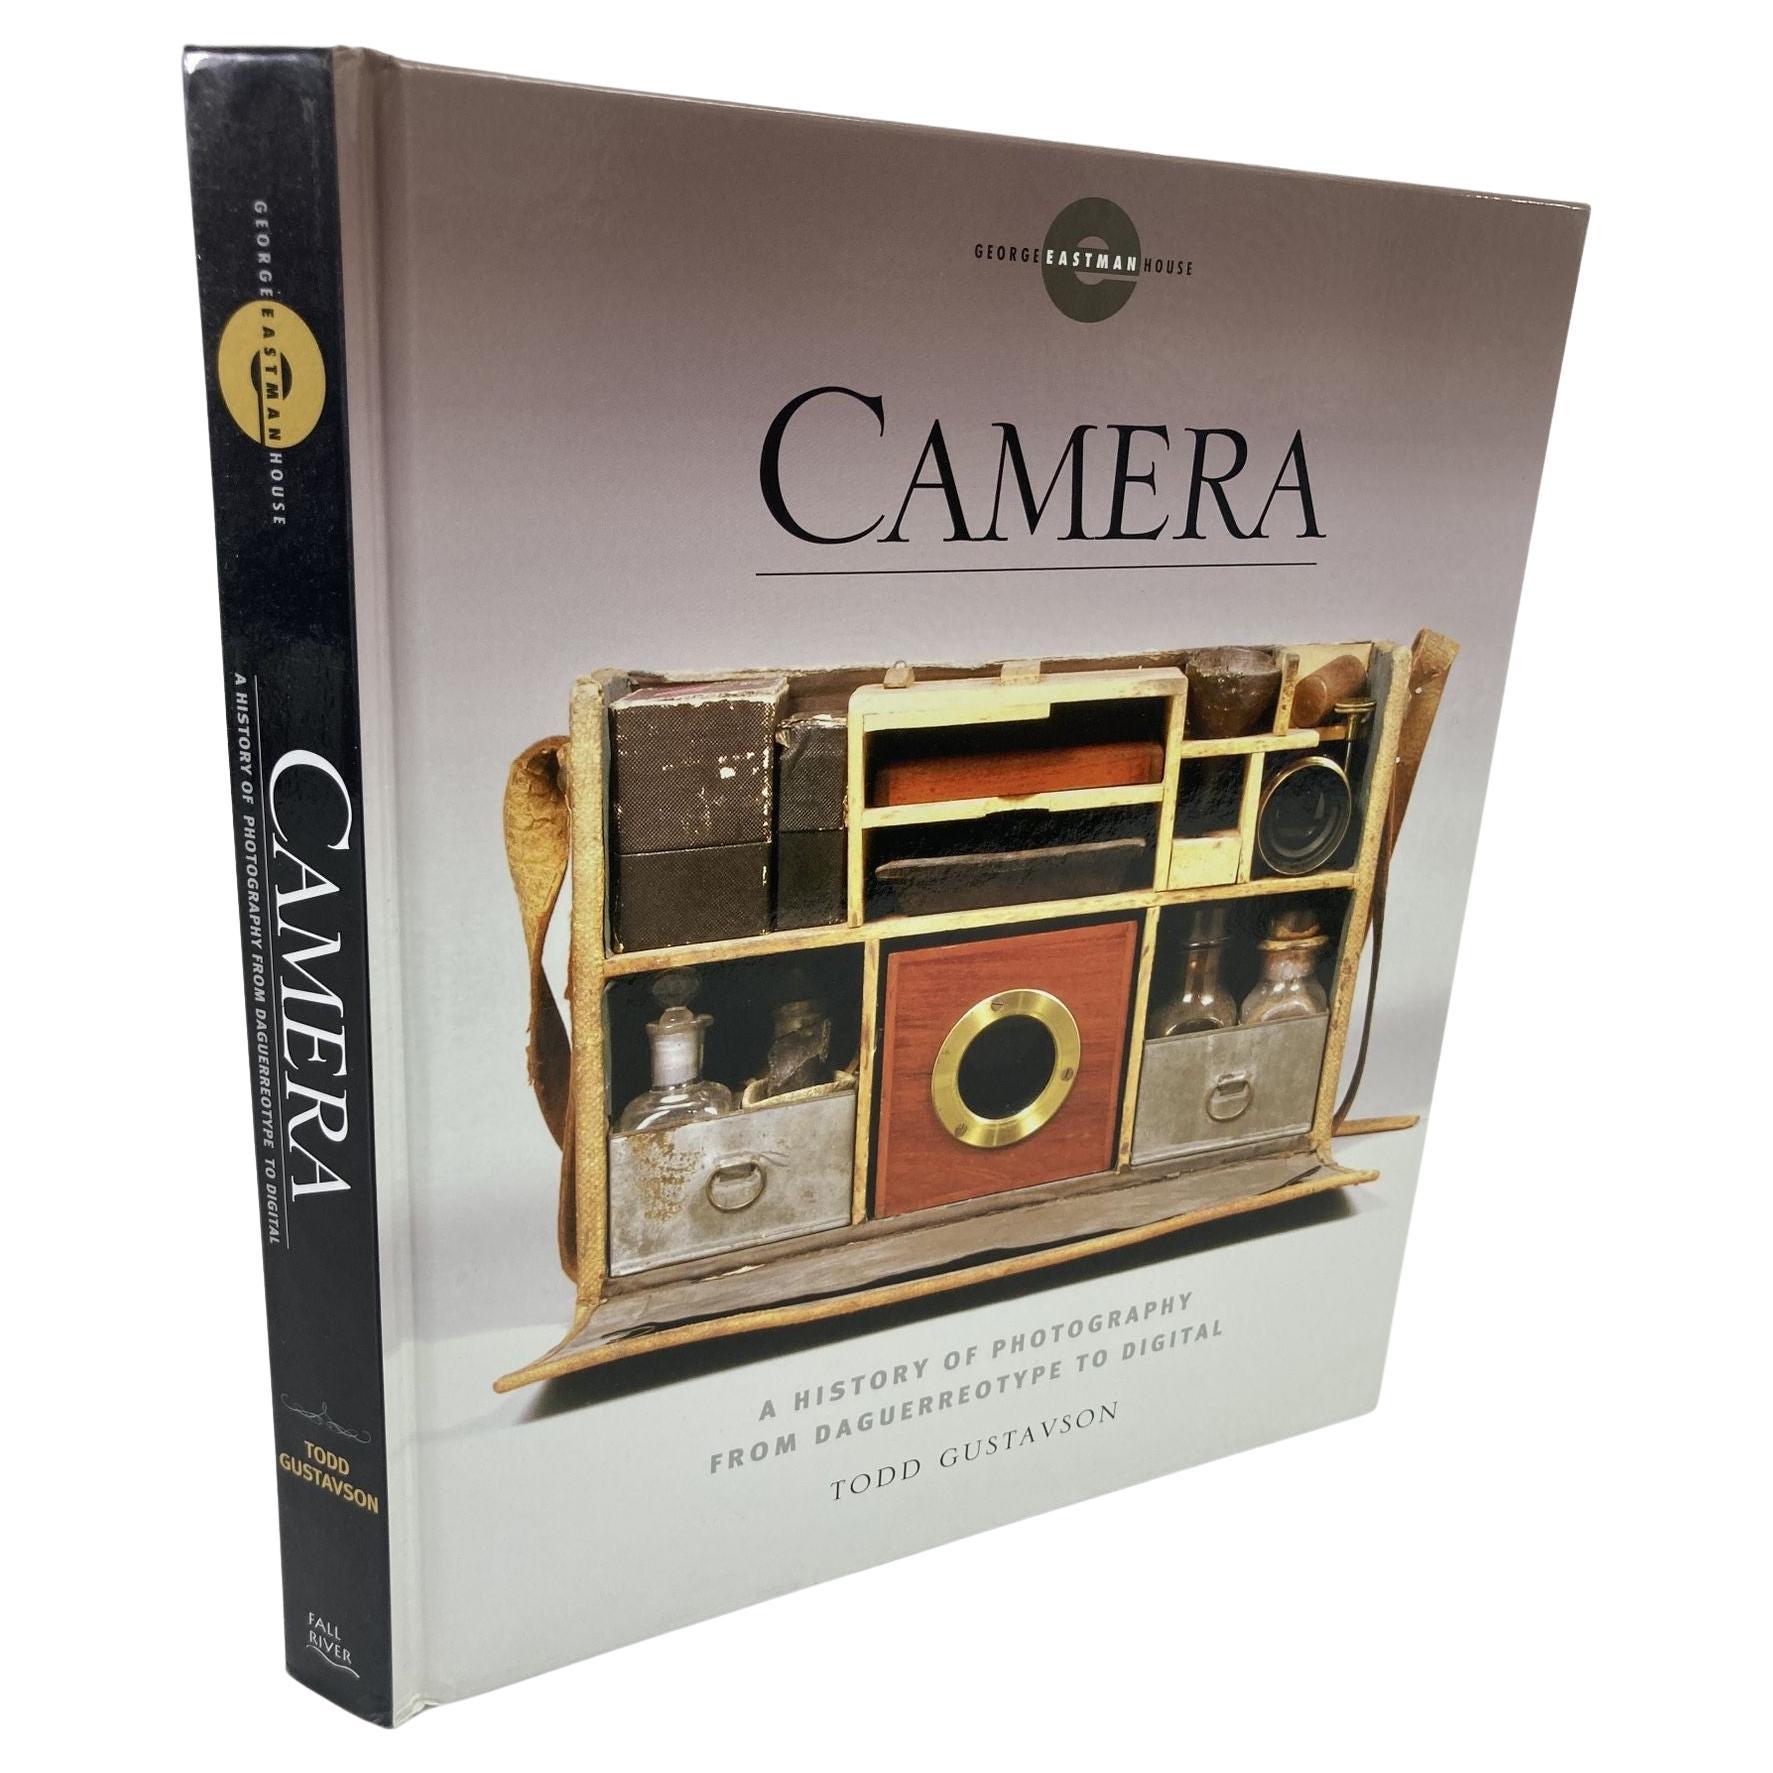 Camera, A History of Photography, from Daguerreotype to Digital by Todd Gustavson